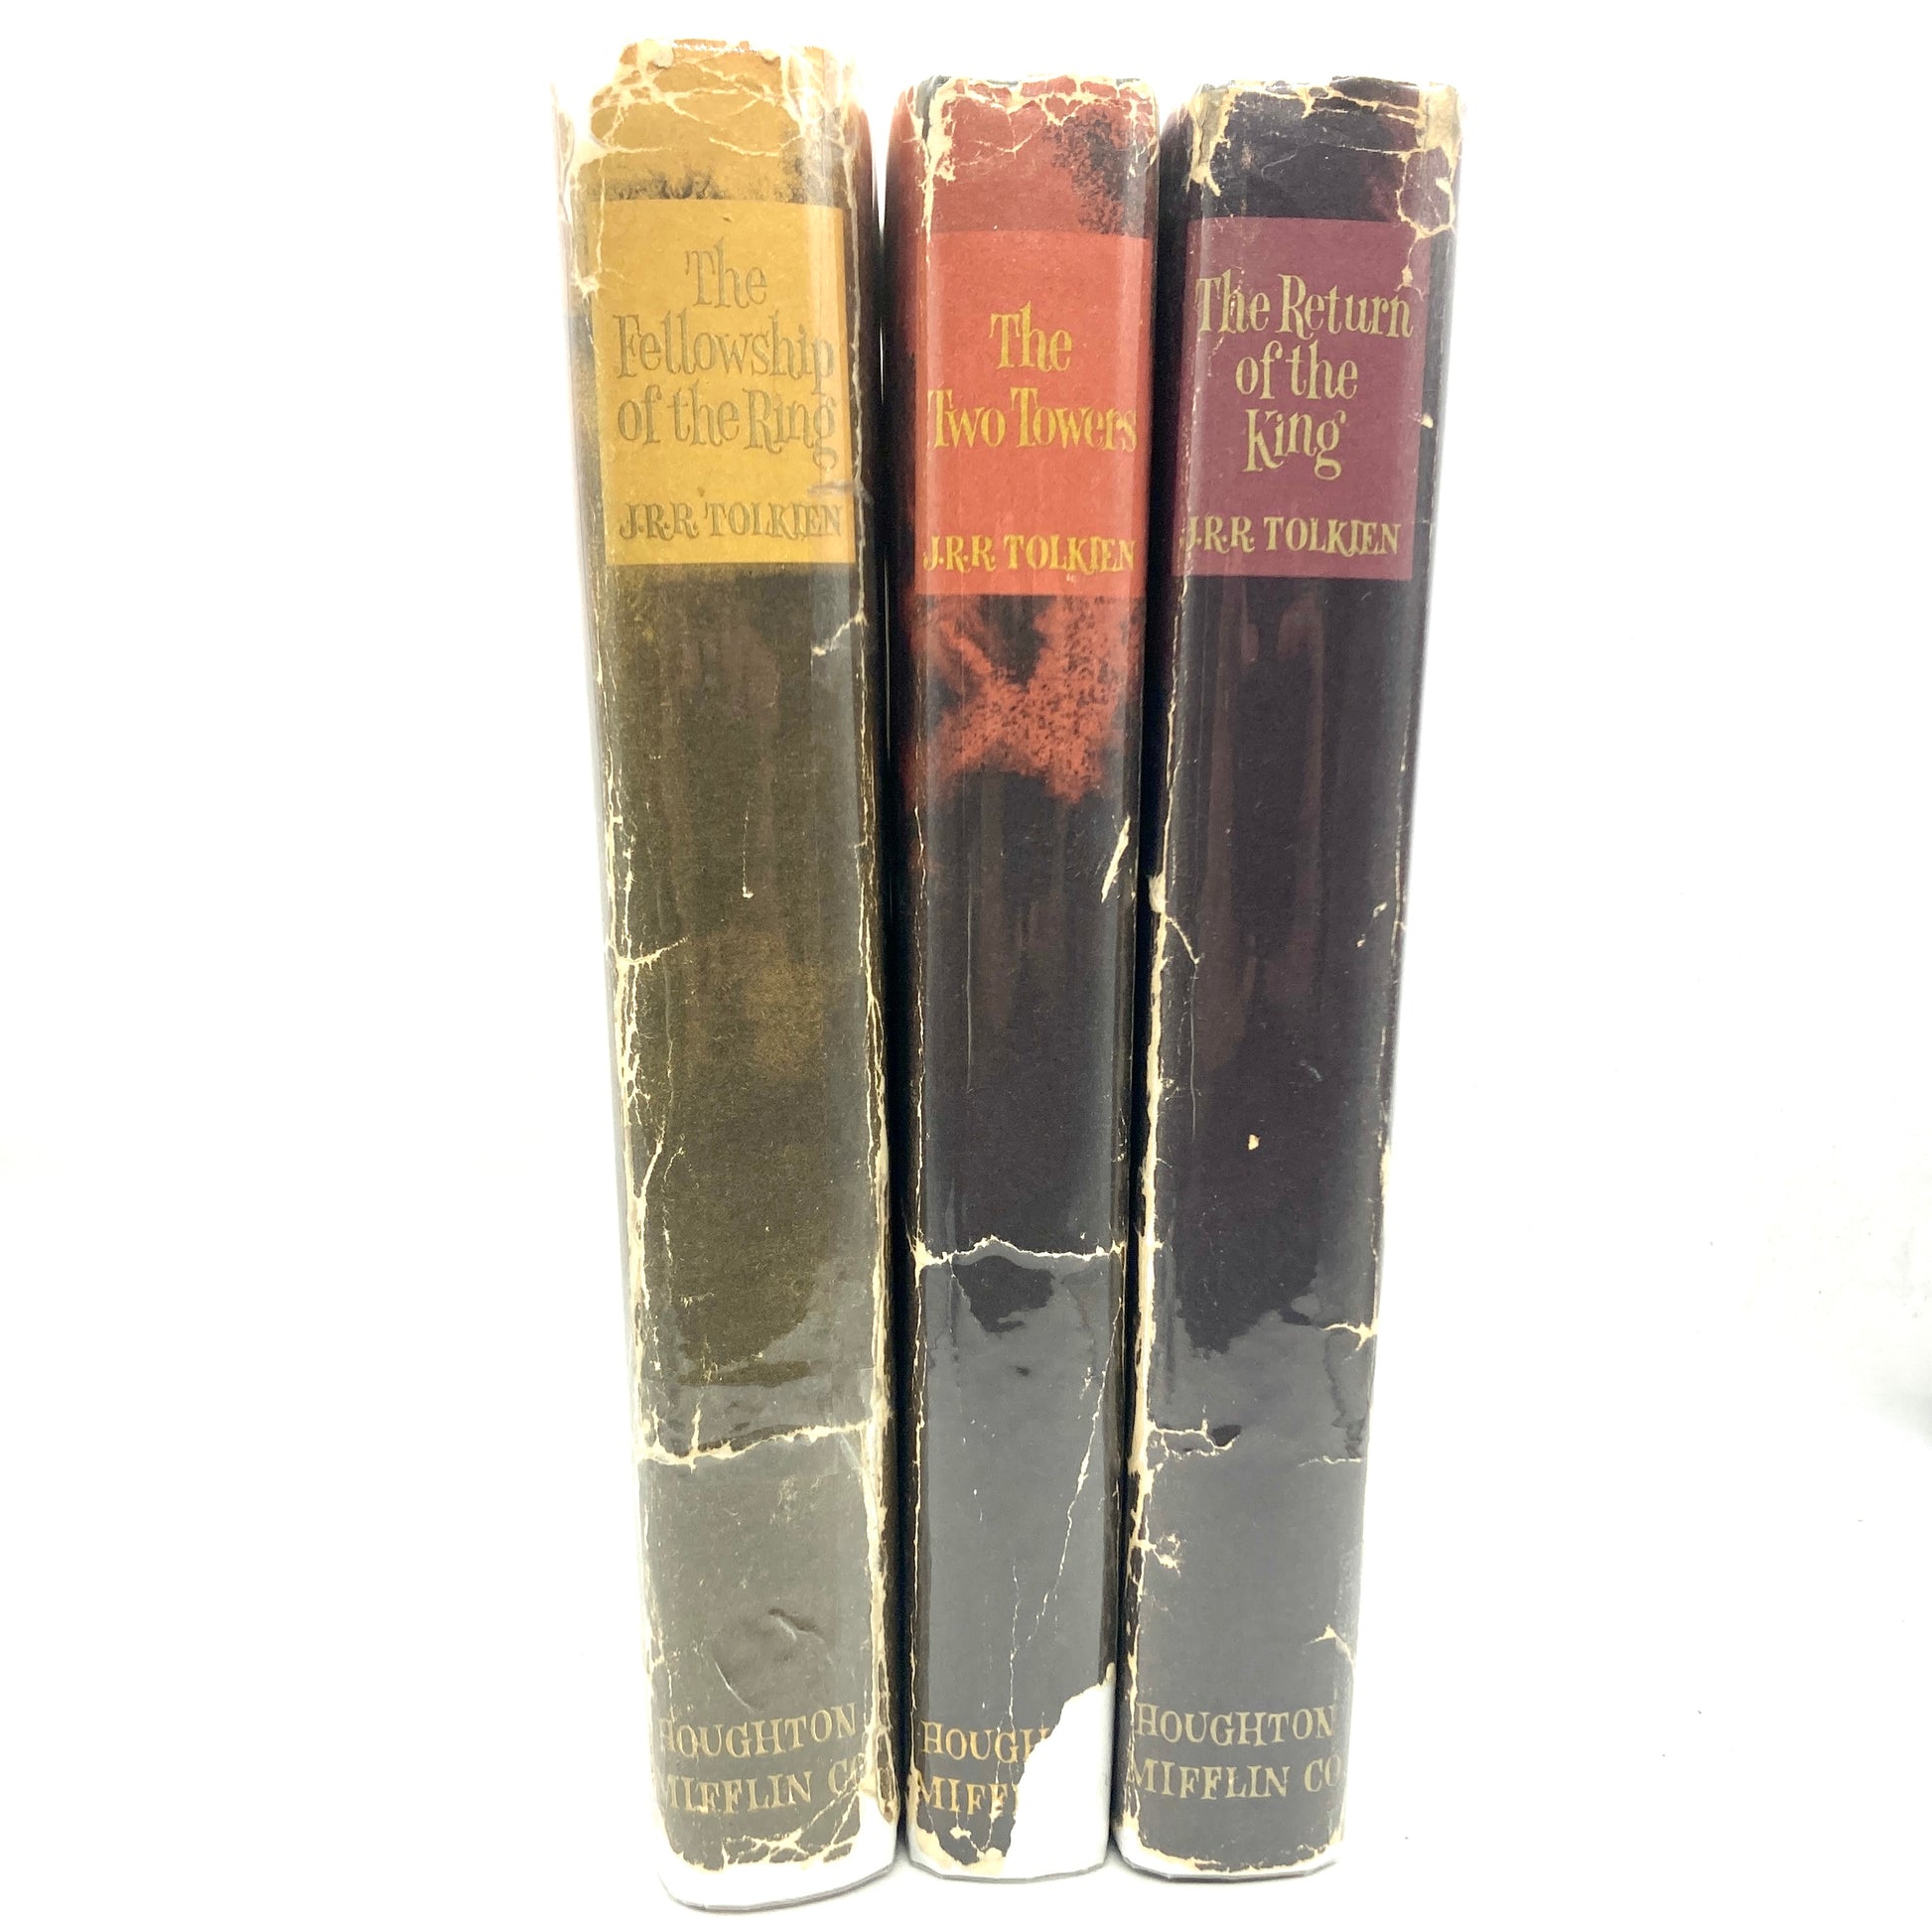 TOLKIEN, J.R.R. "The Lord of the Rings" 3 Volume Set [Houghton Mifflin, 1965] - Buzz Bookstore